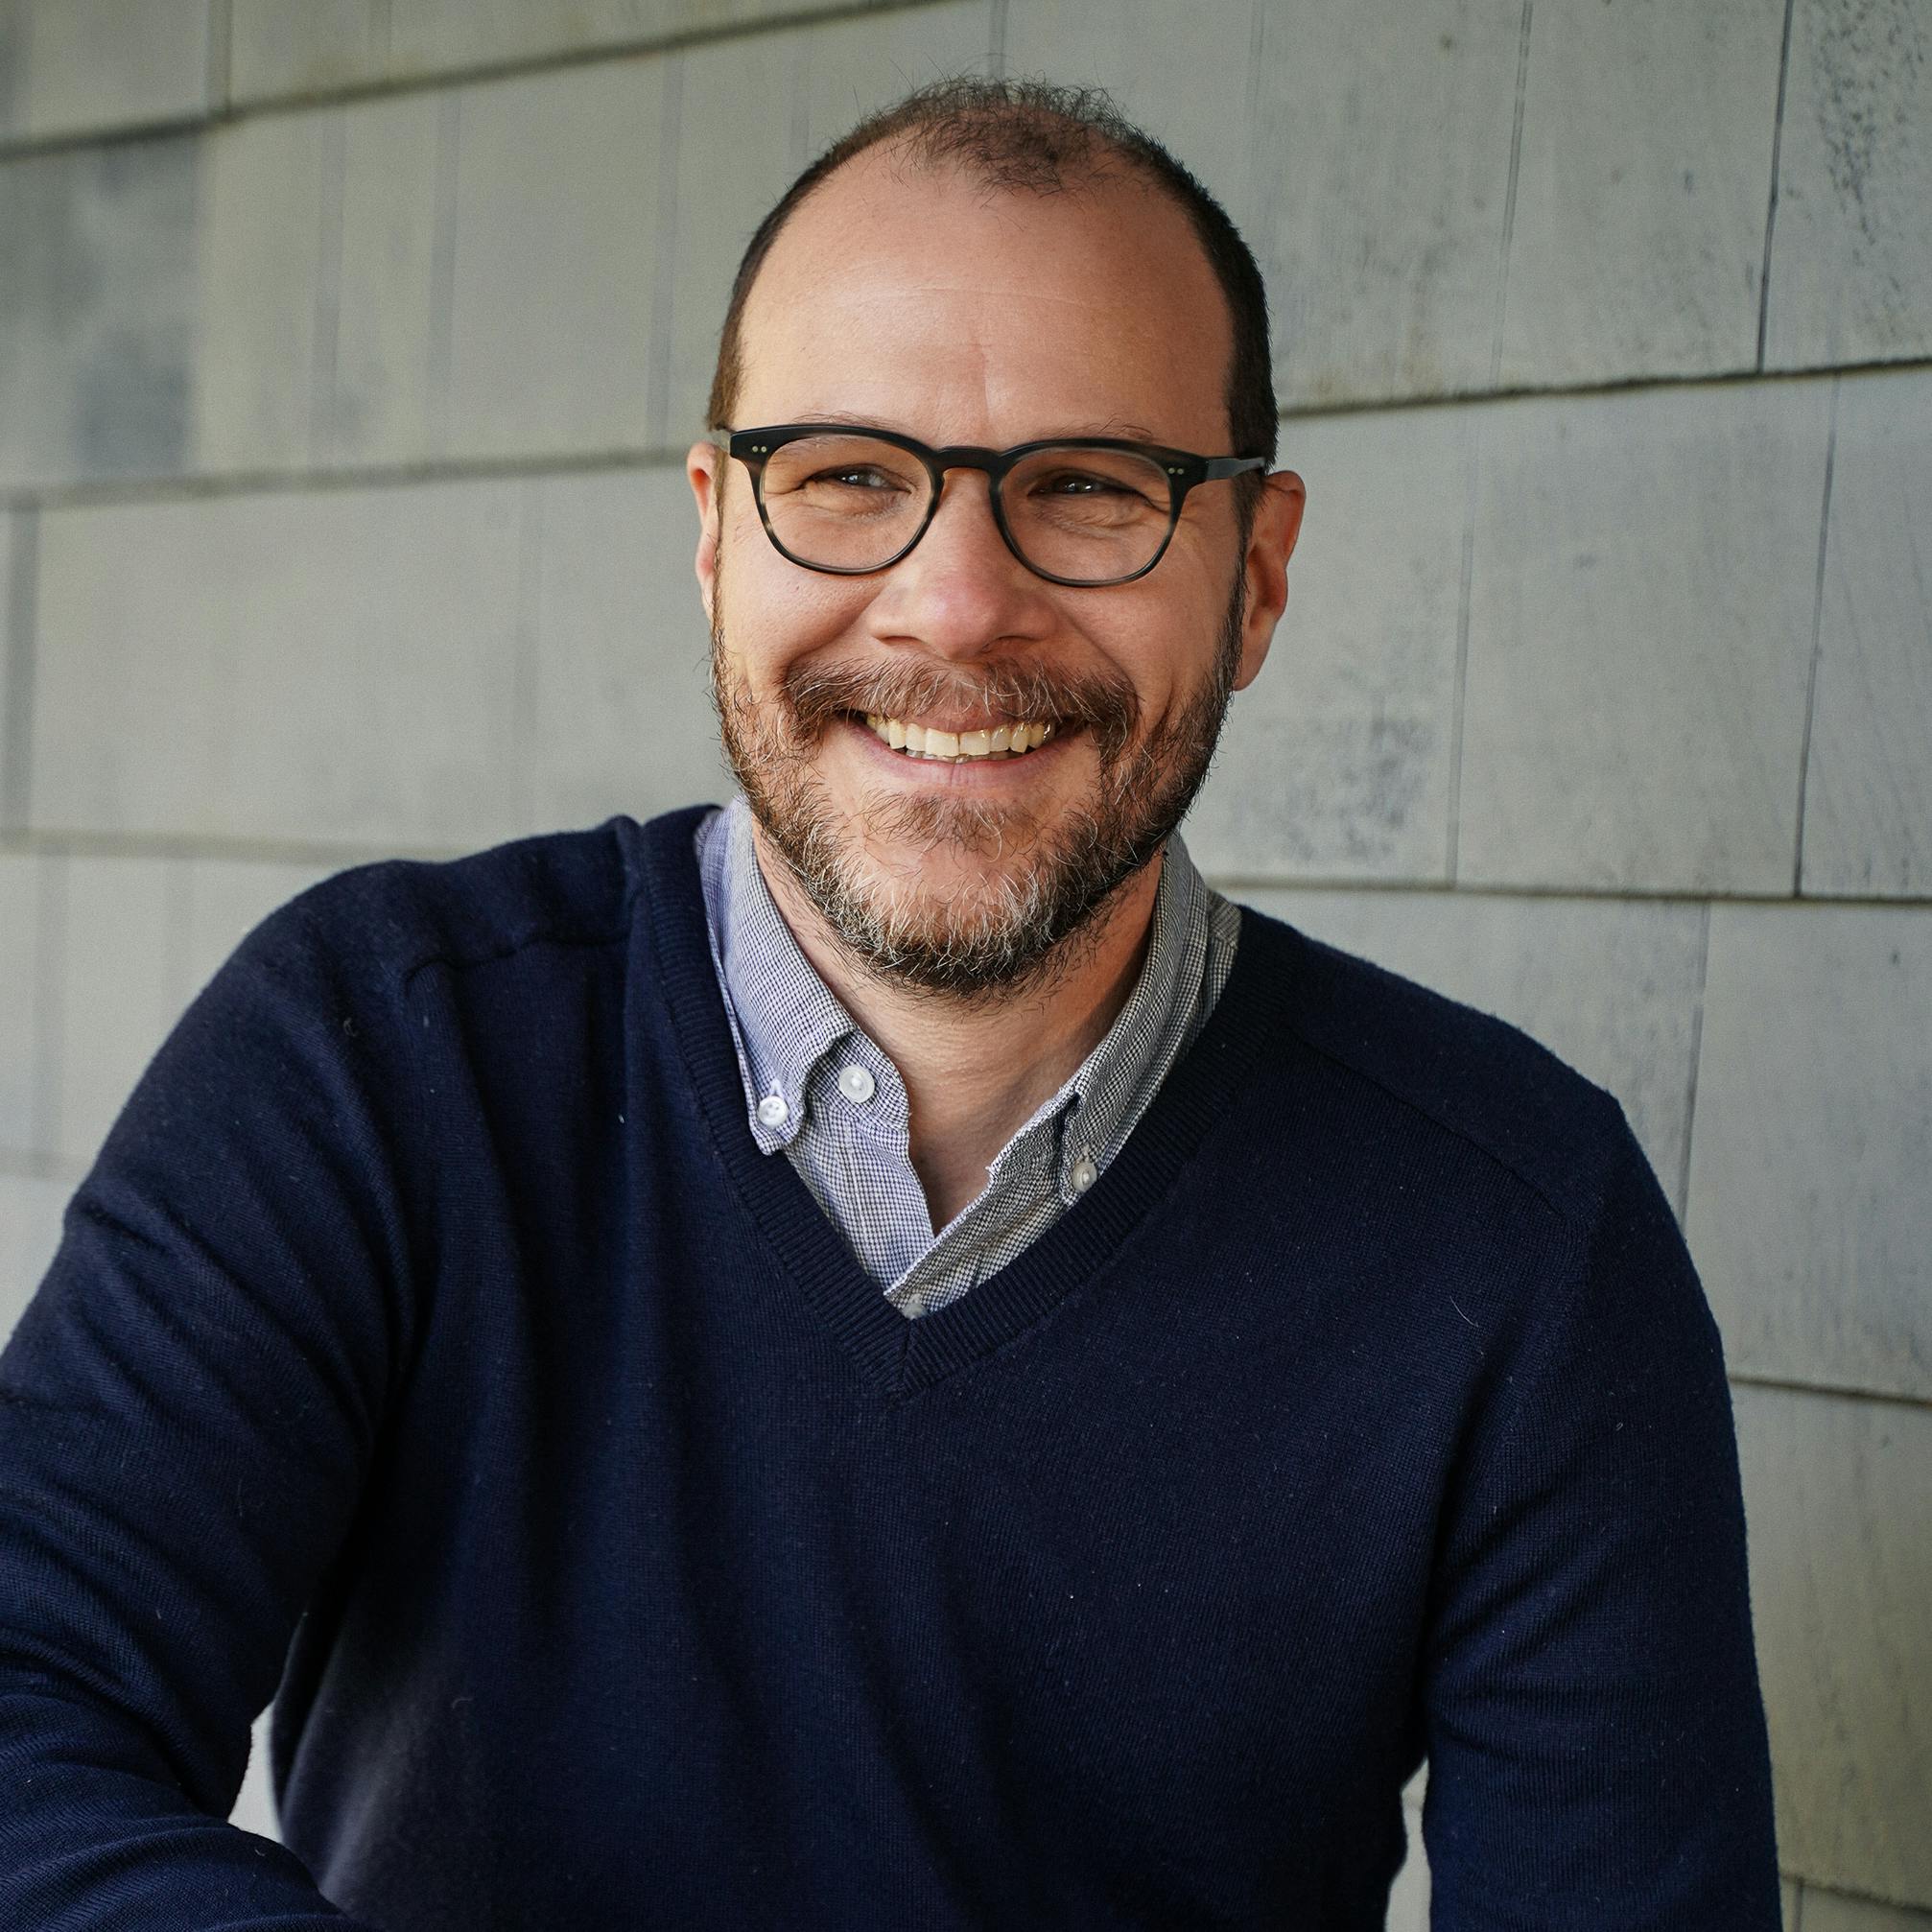 Portrait of StrawberryFrog Finance Director Jon Zeidner smiling in front of a gray wall. He is wearing glasses and a sweater with a button-down collar peeking through.